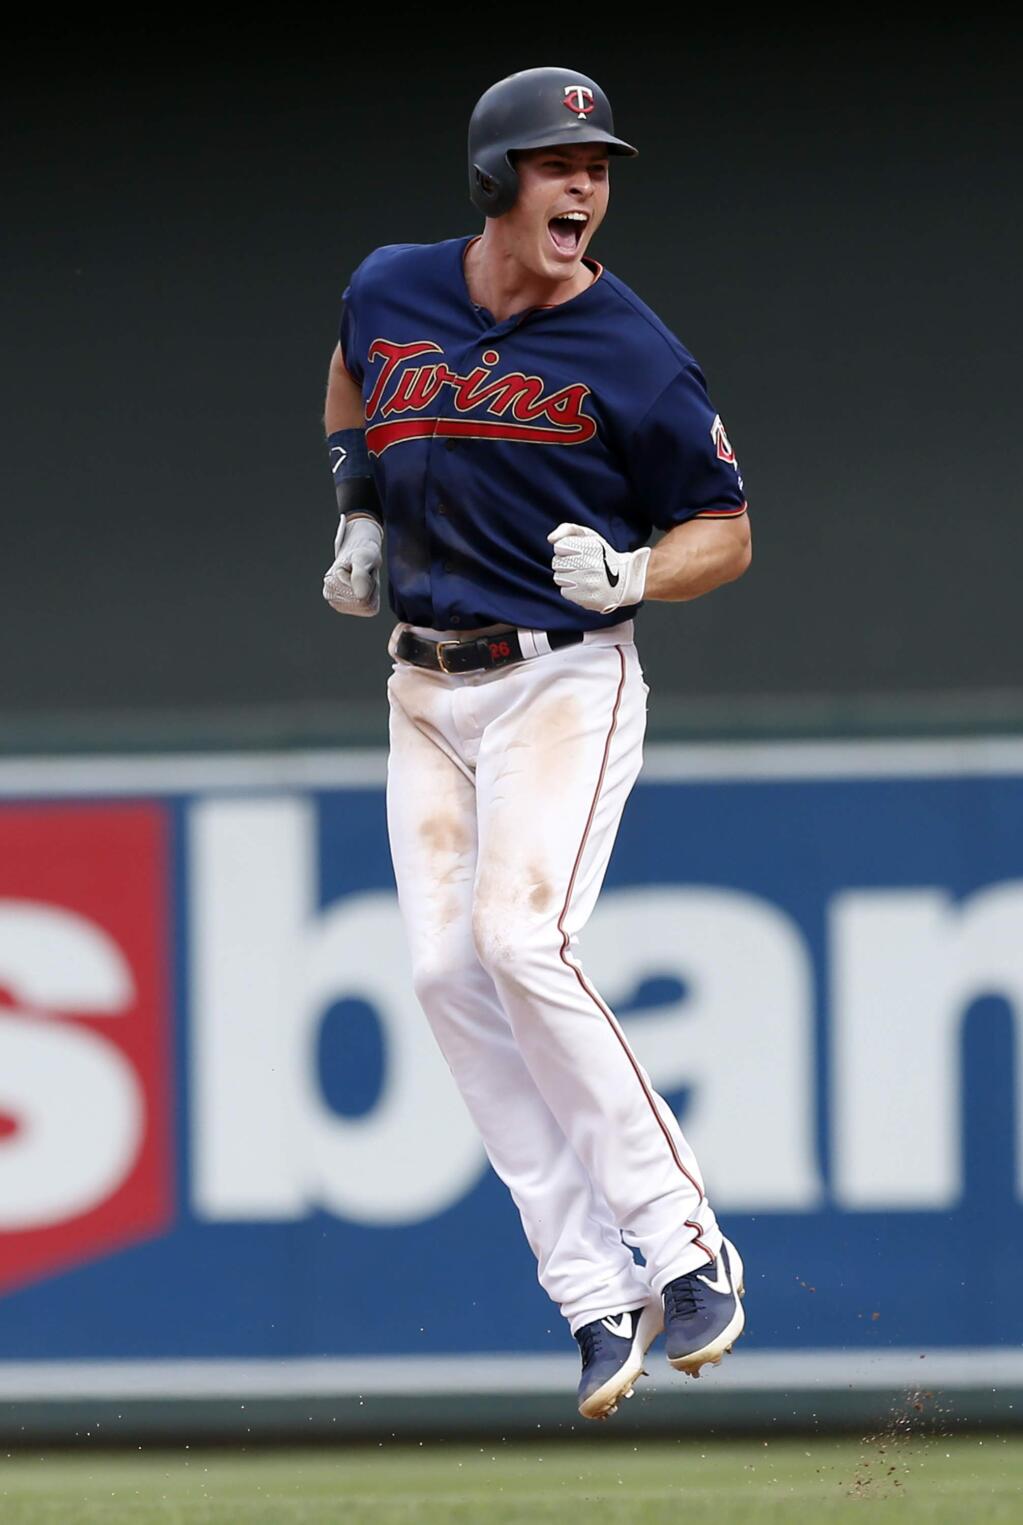 Minnesota Twins' Max Kepler celebrates his walk-off RBI single as the Twins beat the Oakland Athletics 7-6 in a baseball game Sunday, July 21, 2019, in Minneapolis. Kepler had four RBIs in the game. (AP Photo/Jim Mone)